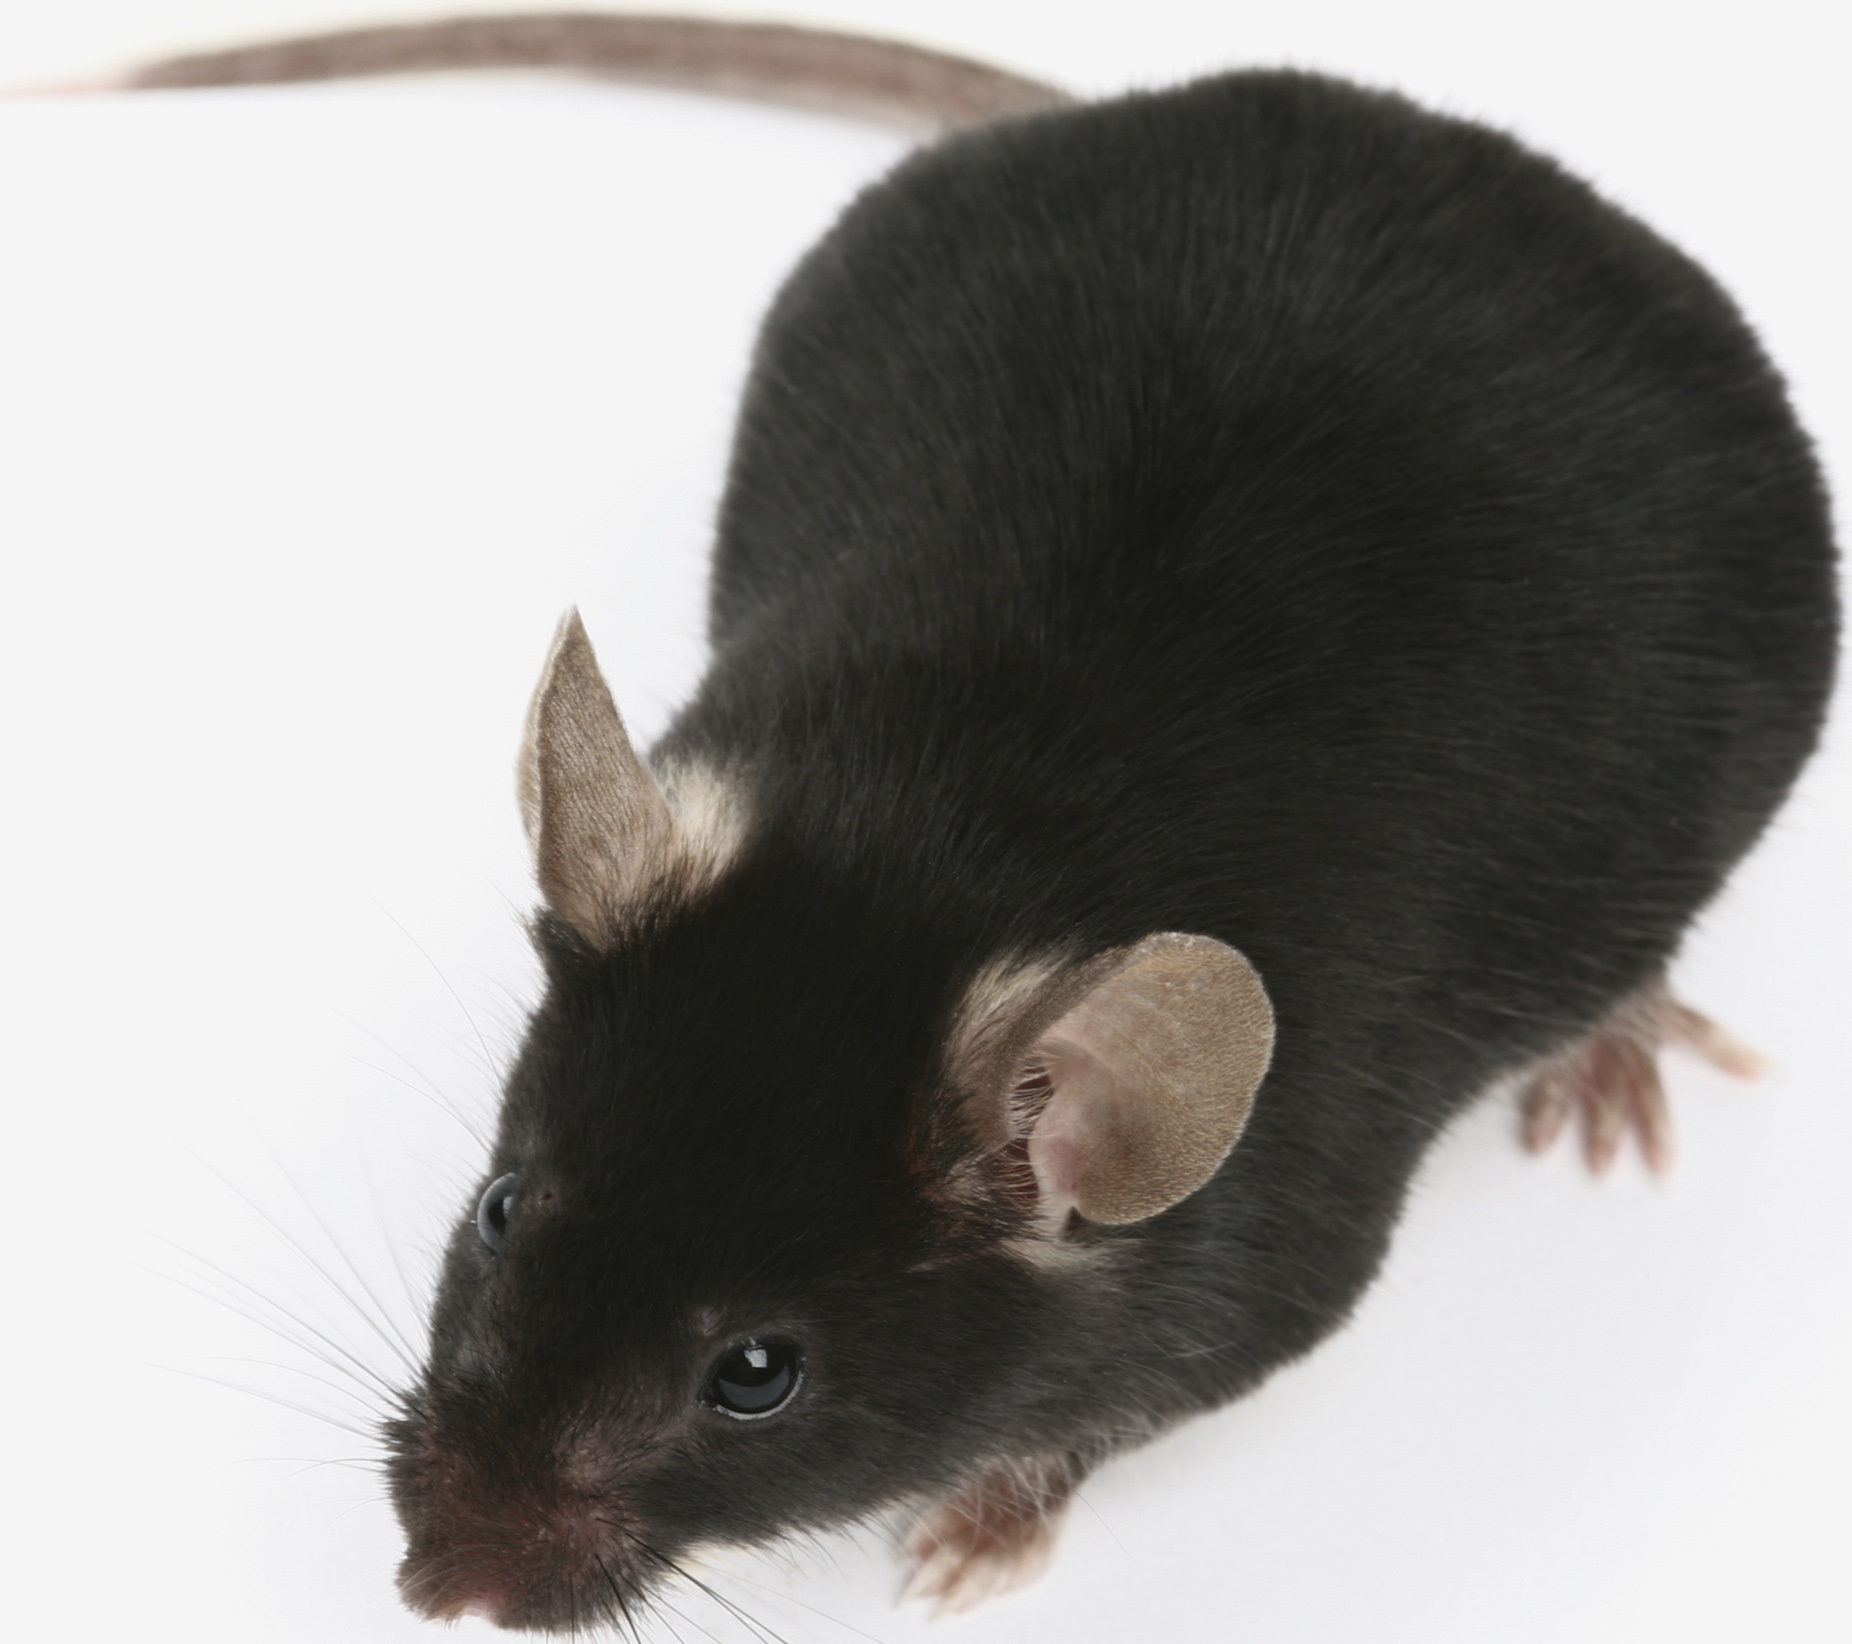 Pheromones Trigger Aggression Between Male Mice | National Institutes of  Health (NIH)